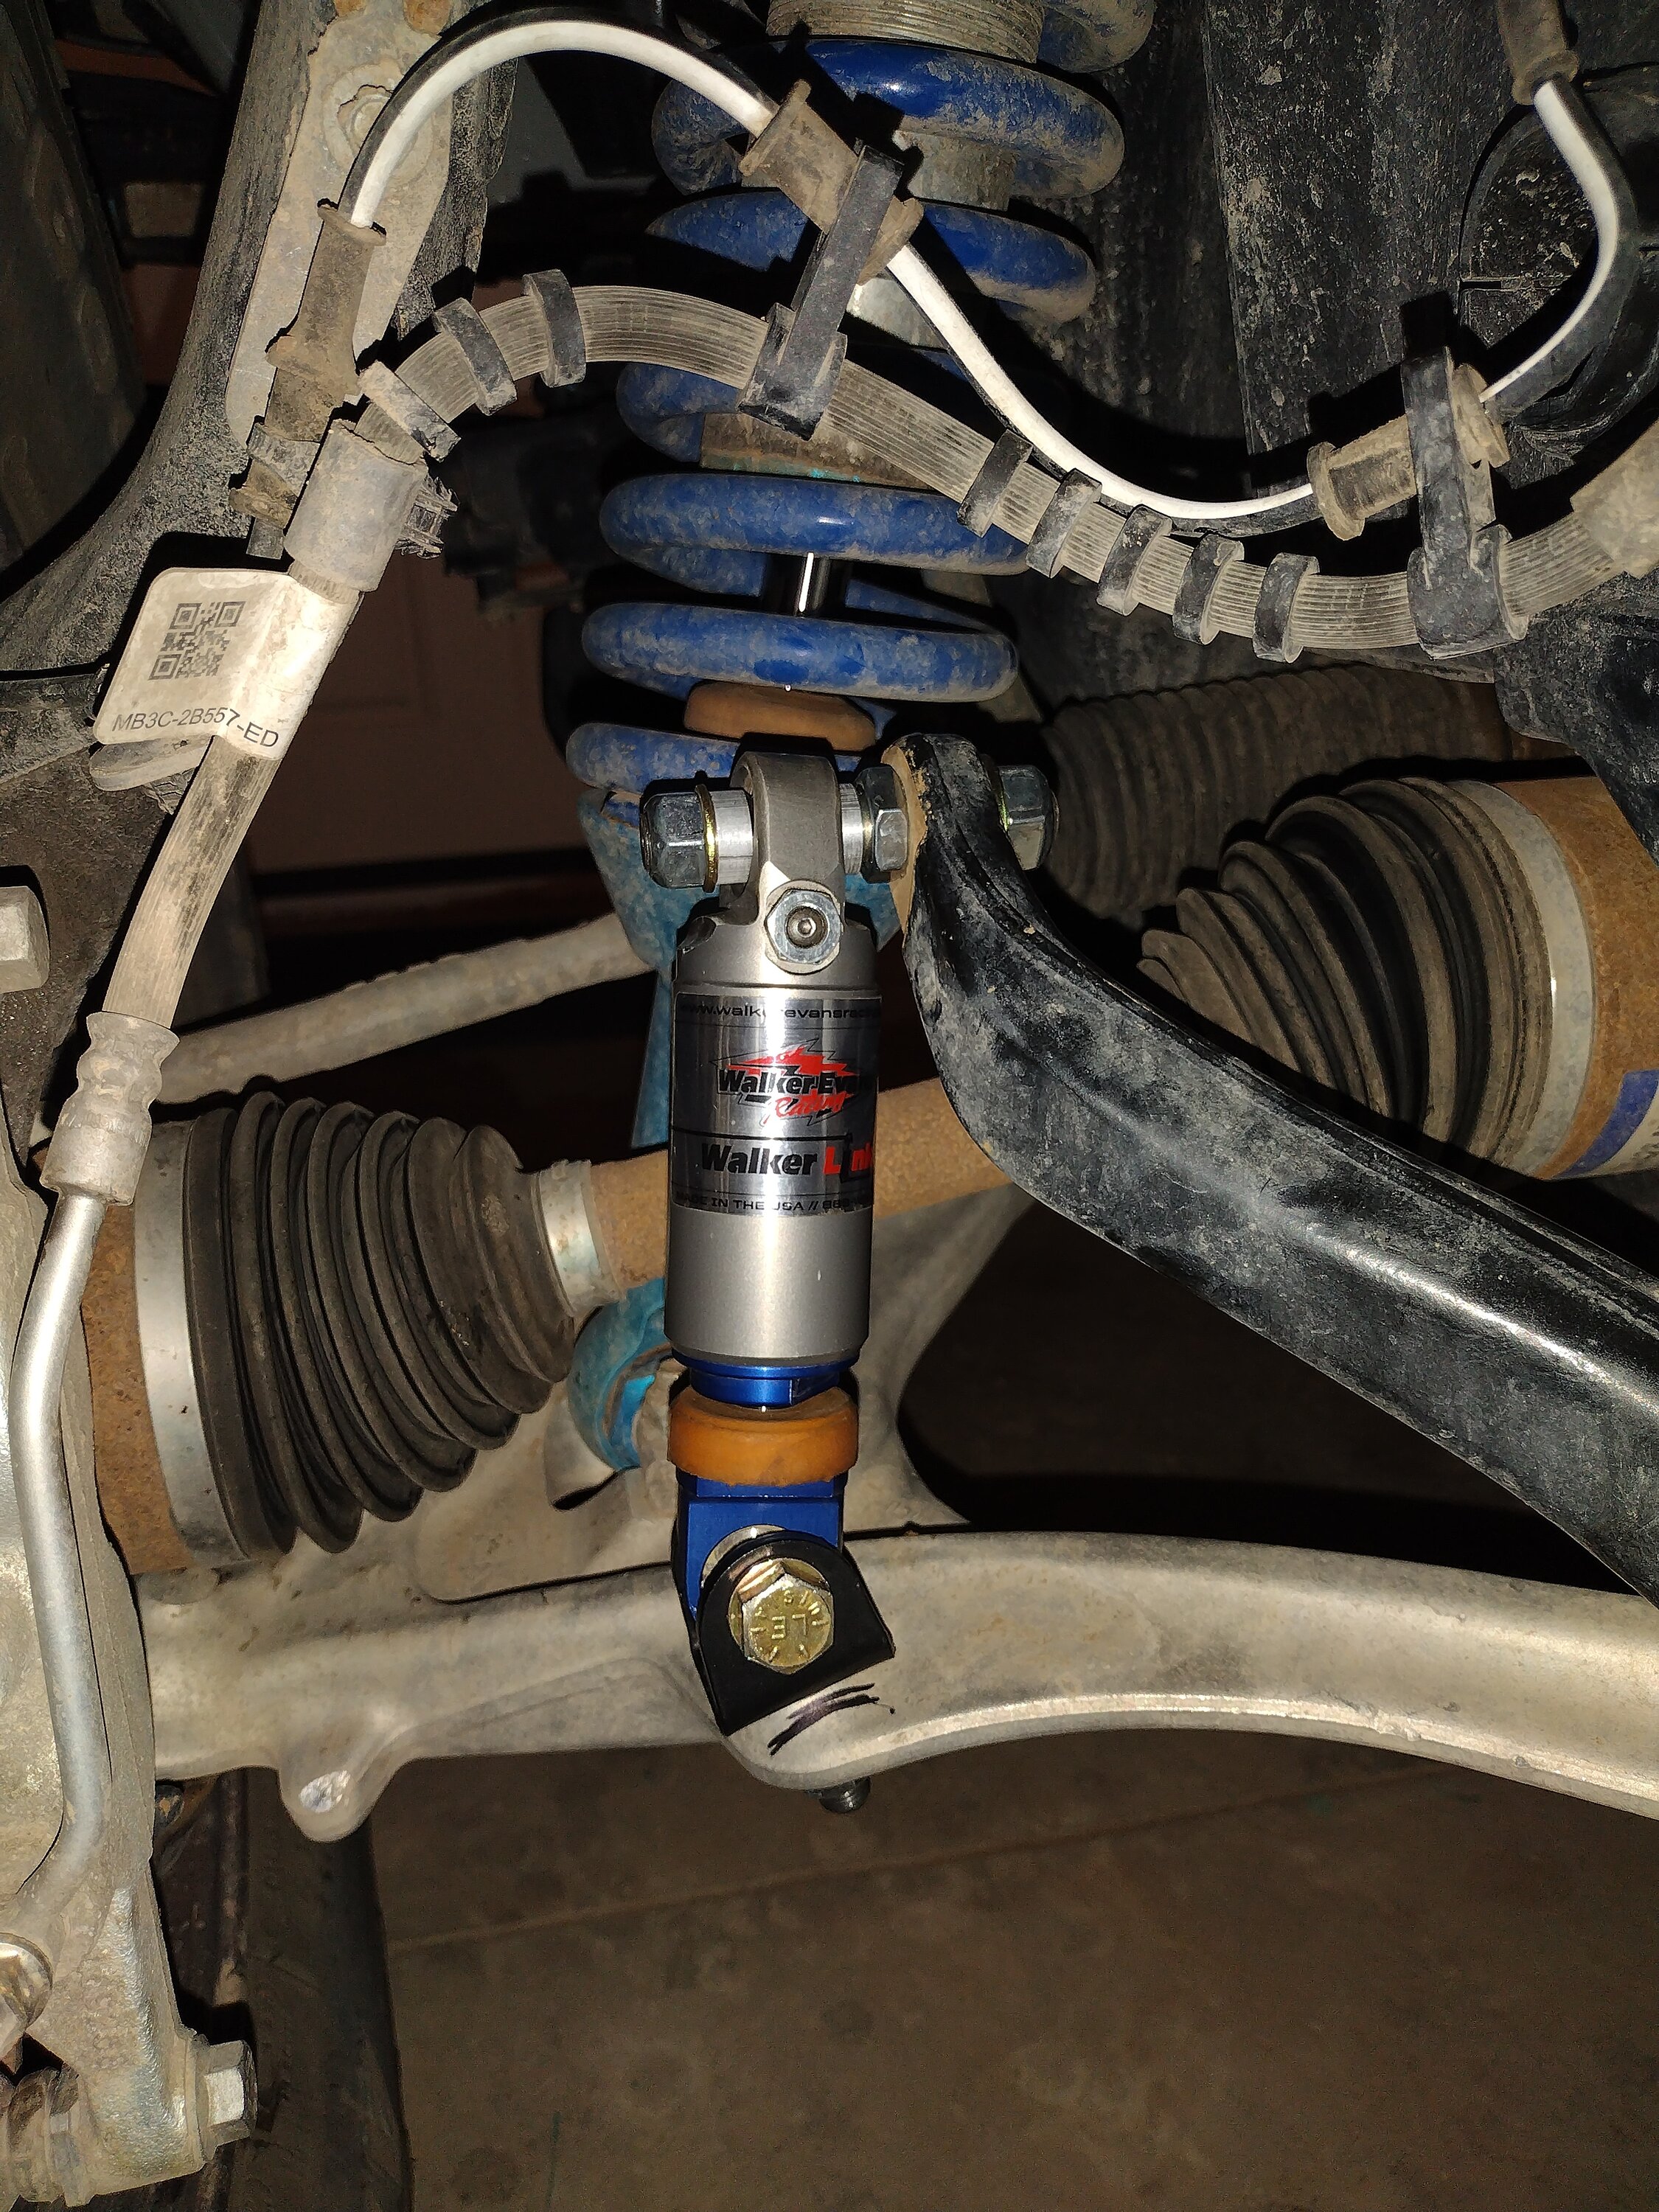 Ford Bronco NOW AVAILABLE: BOSS "Walker Link" Sway Bar Shock System - Great alternative to disconnects! WLBL_L